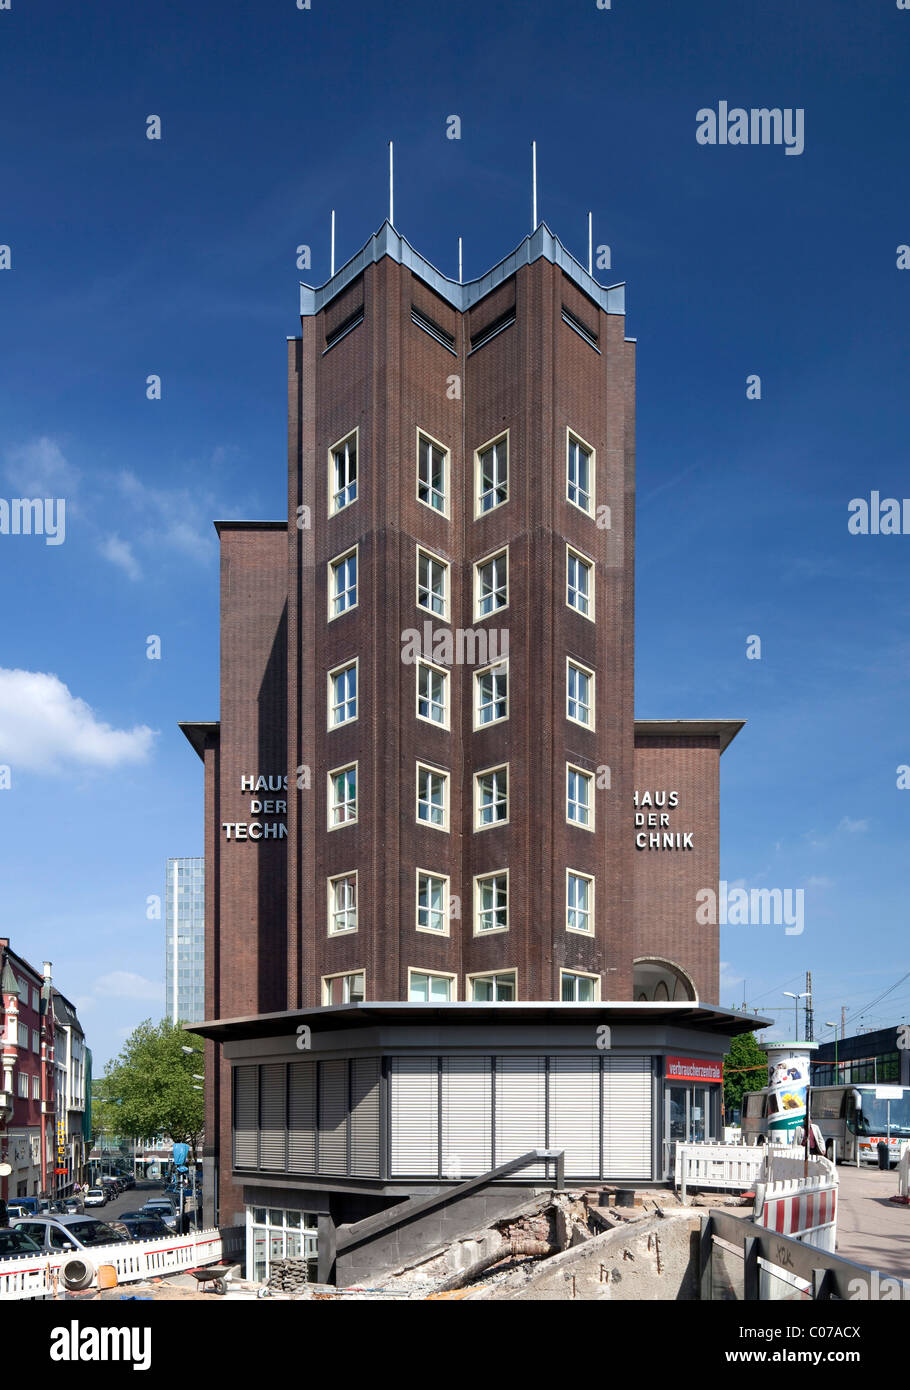 House of Technology or HdT, Institute for Higher Education, expressionism, Essen, Ruhrgebiet region, North Rhine-Westphalia Stock Photo